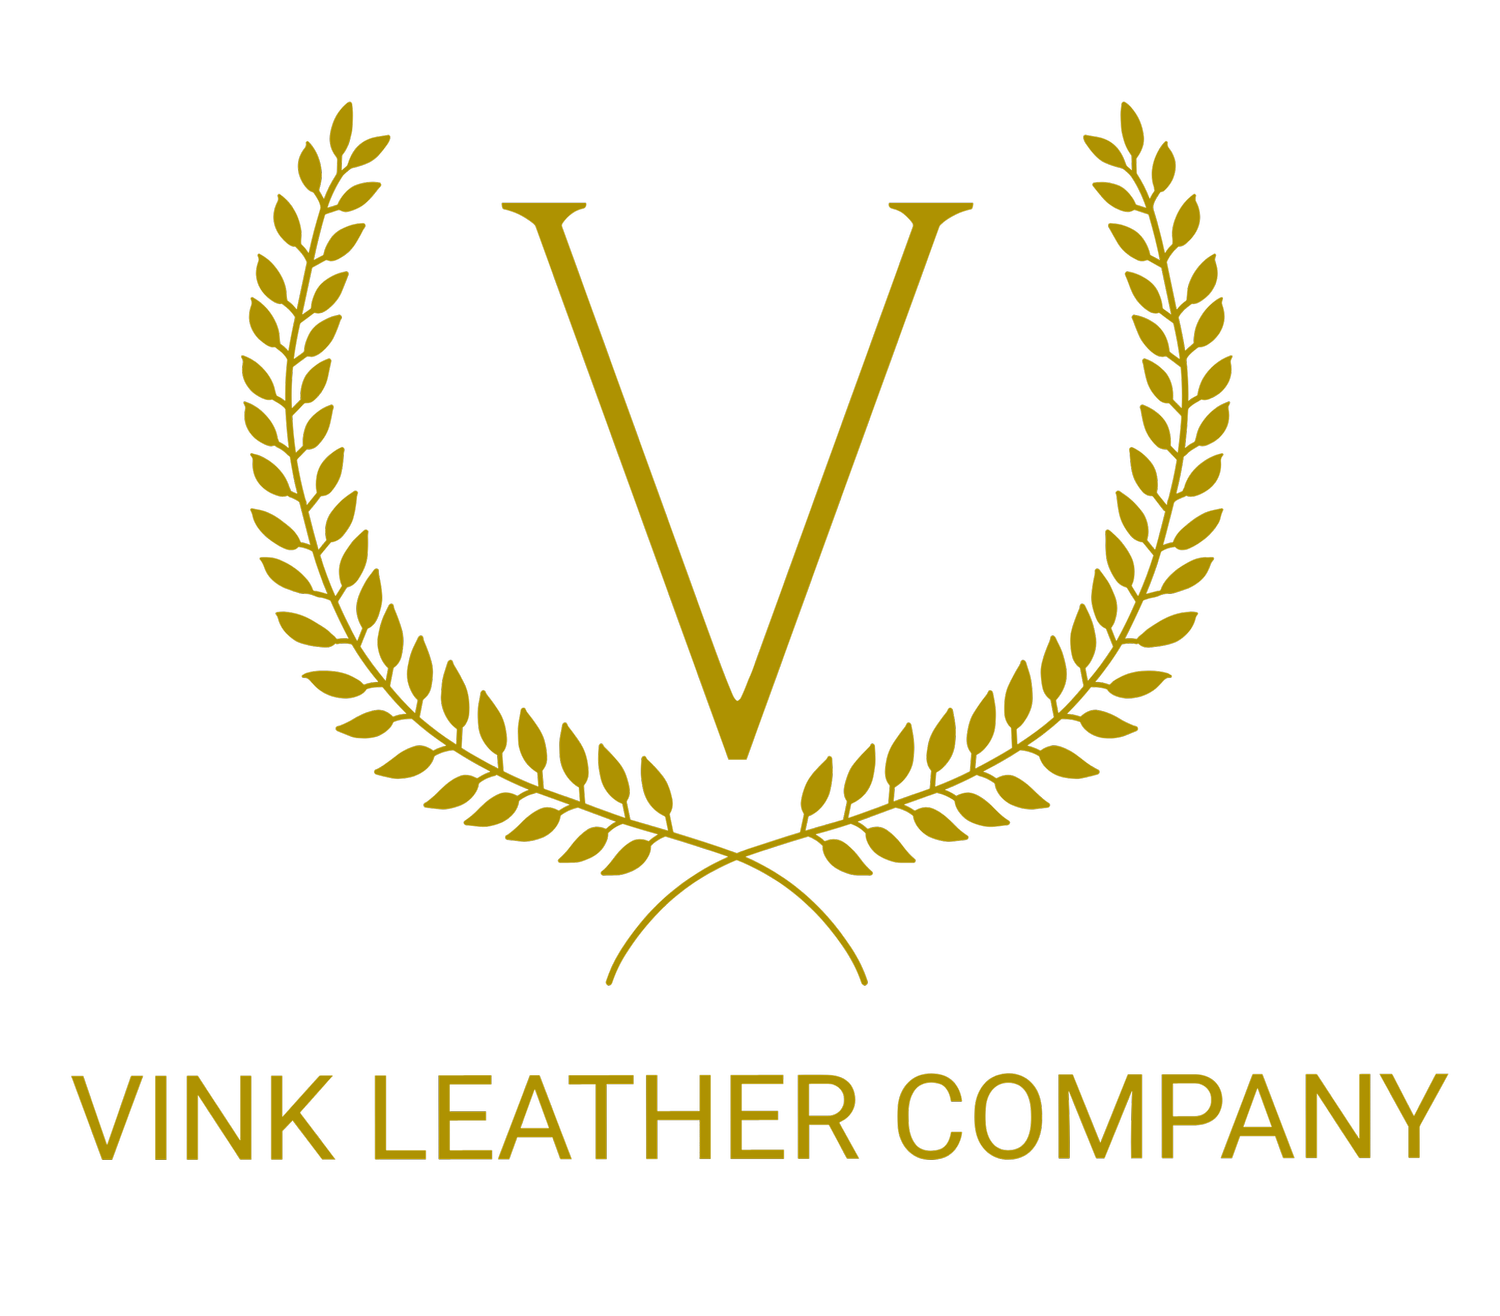 Vink Leather Company